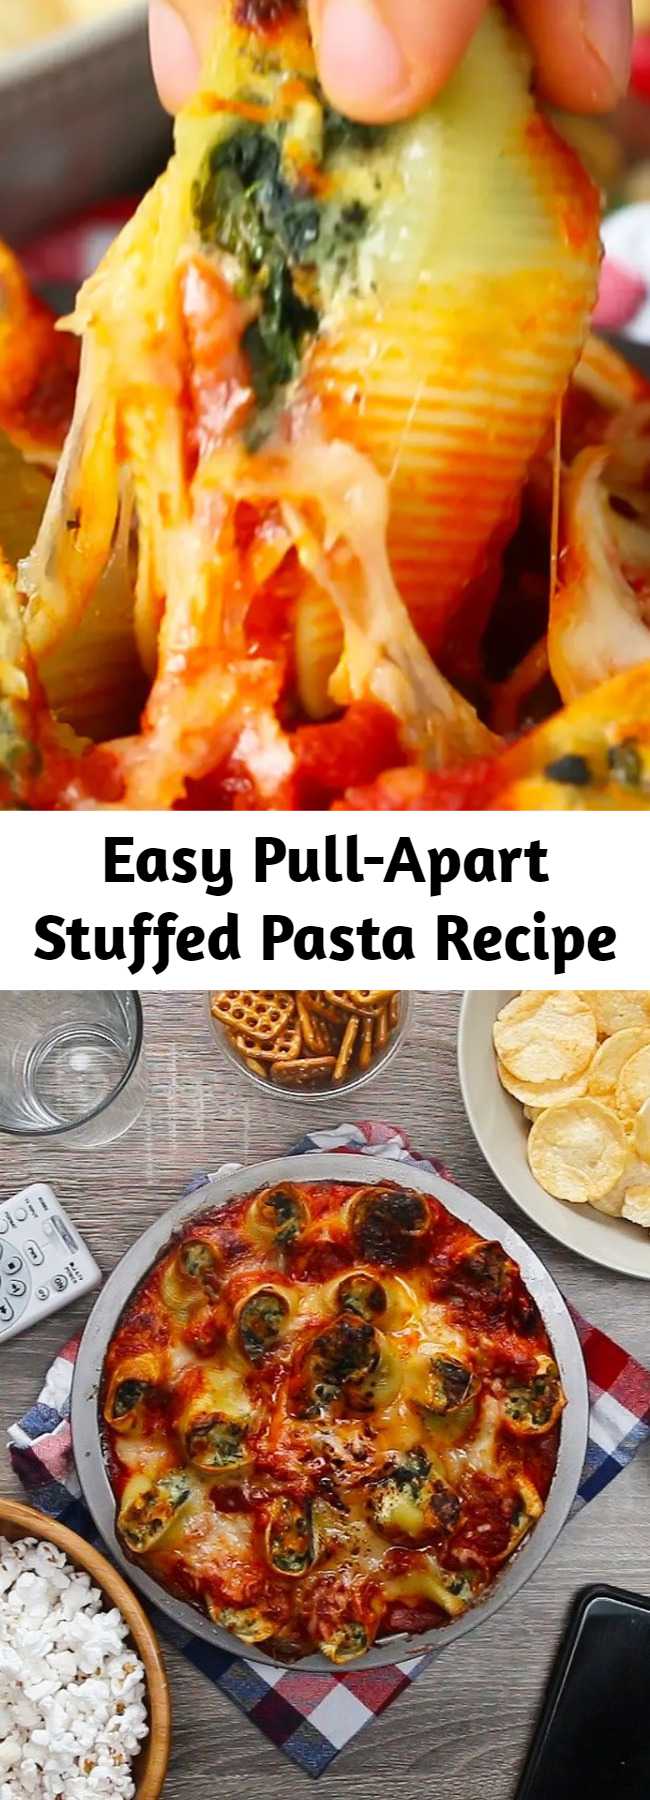 Easy Pull-Apart Stuffed Pasta Recipe - This Pull-Apart Stuffed Pasta Is Everything You Could Want In An Appetizer